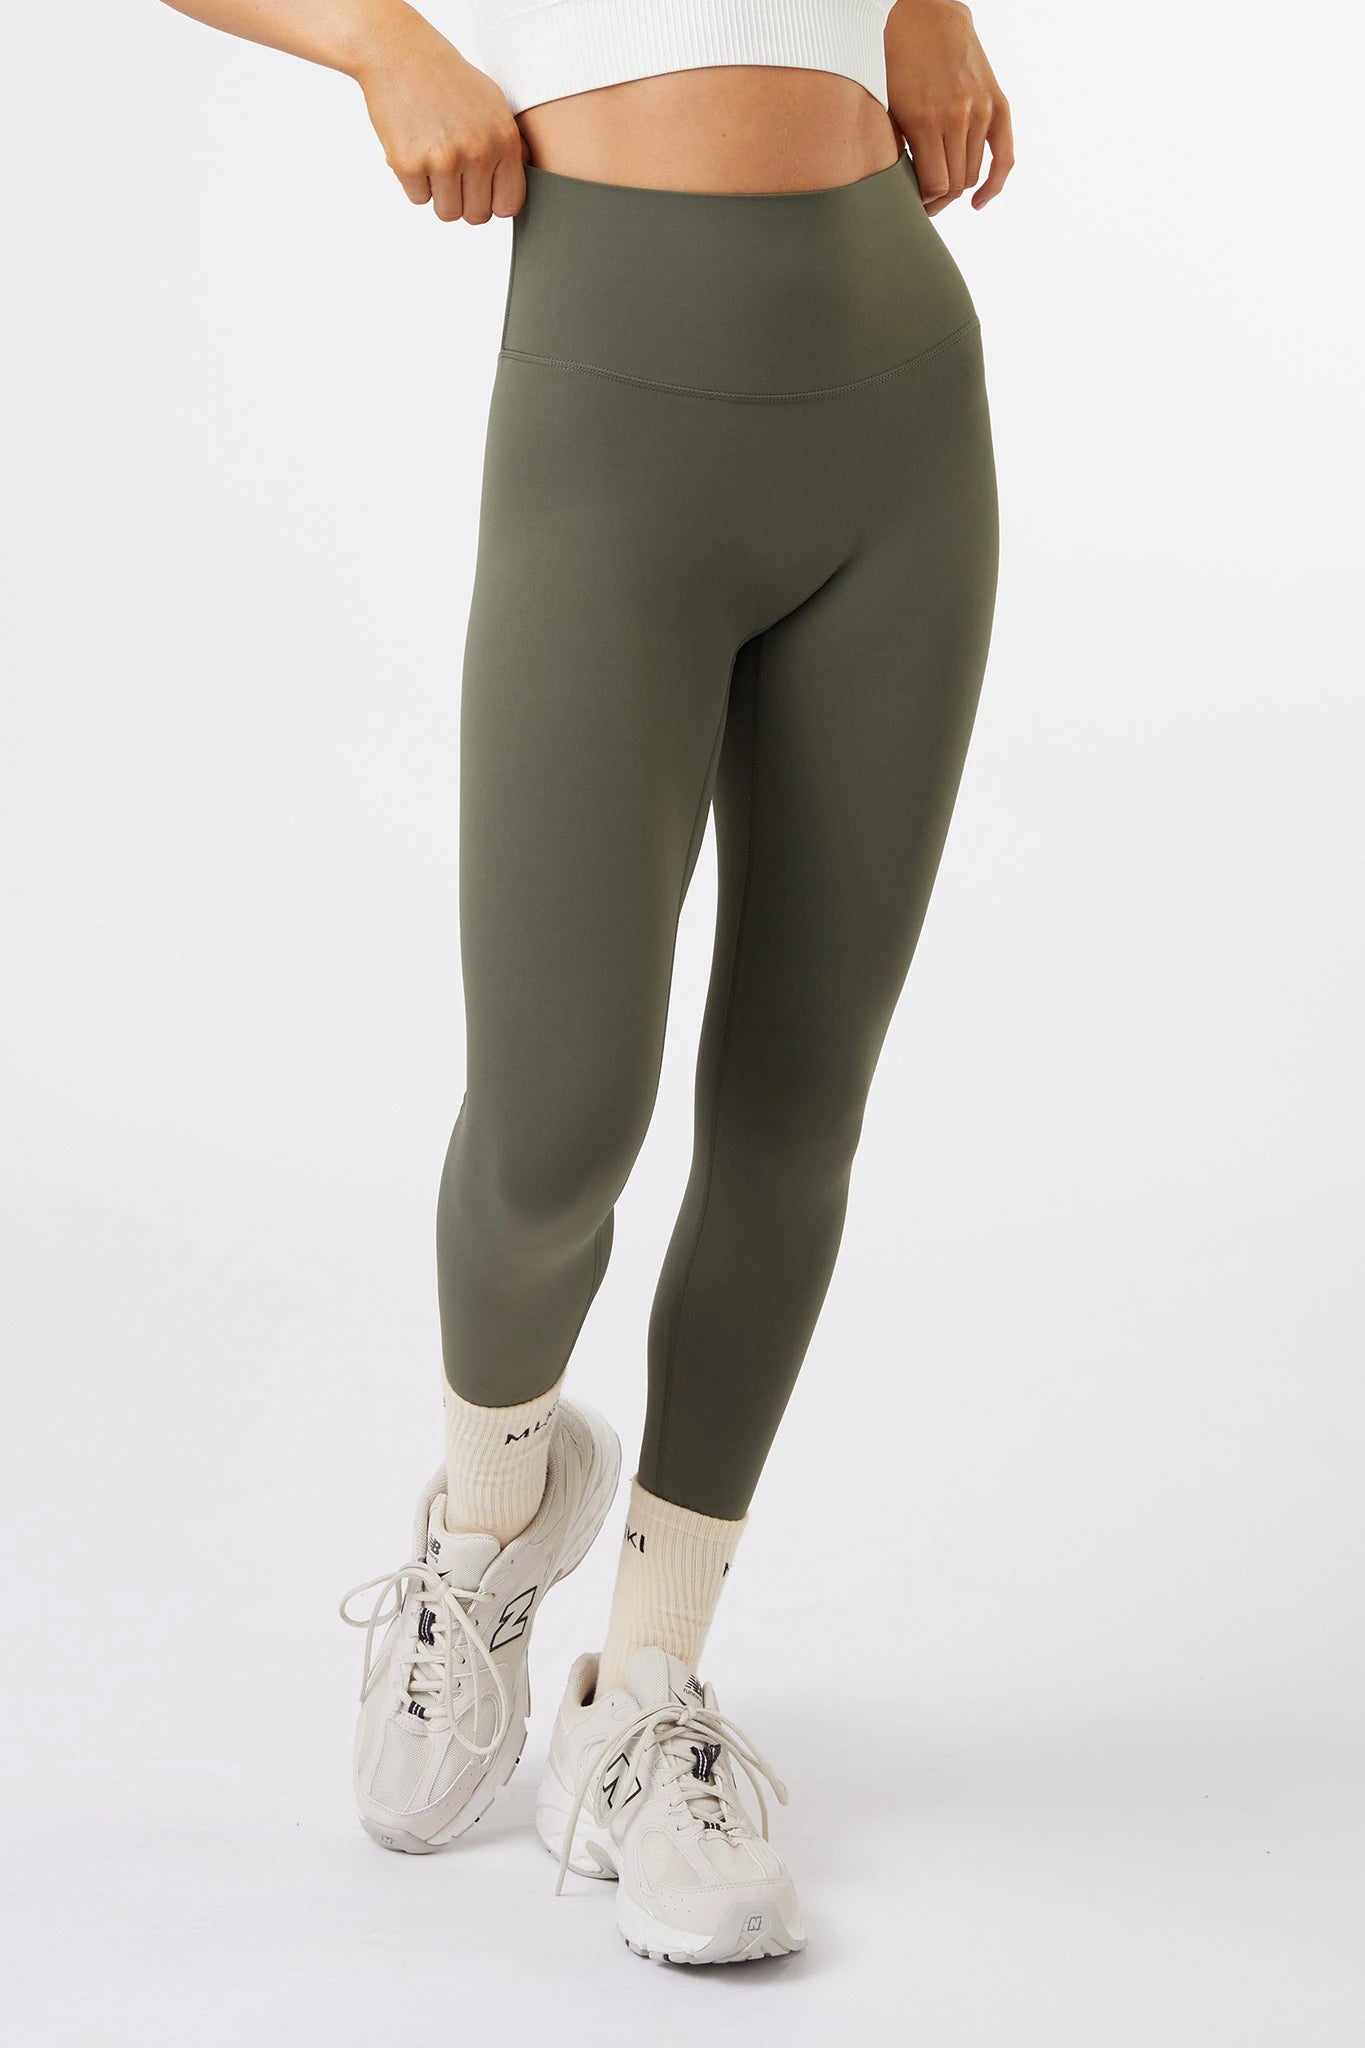 Butter Soft Tights in Olive Green – GLOWco